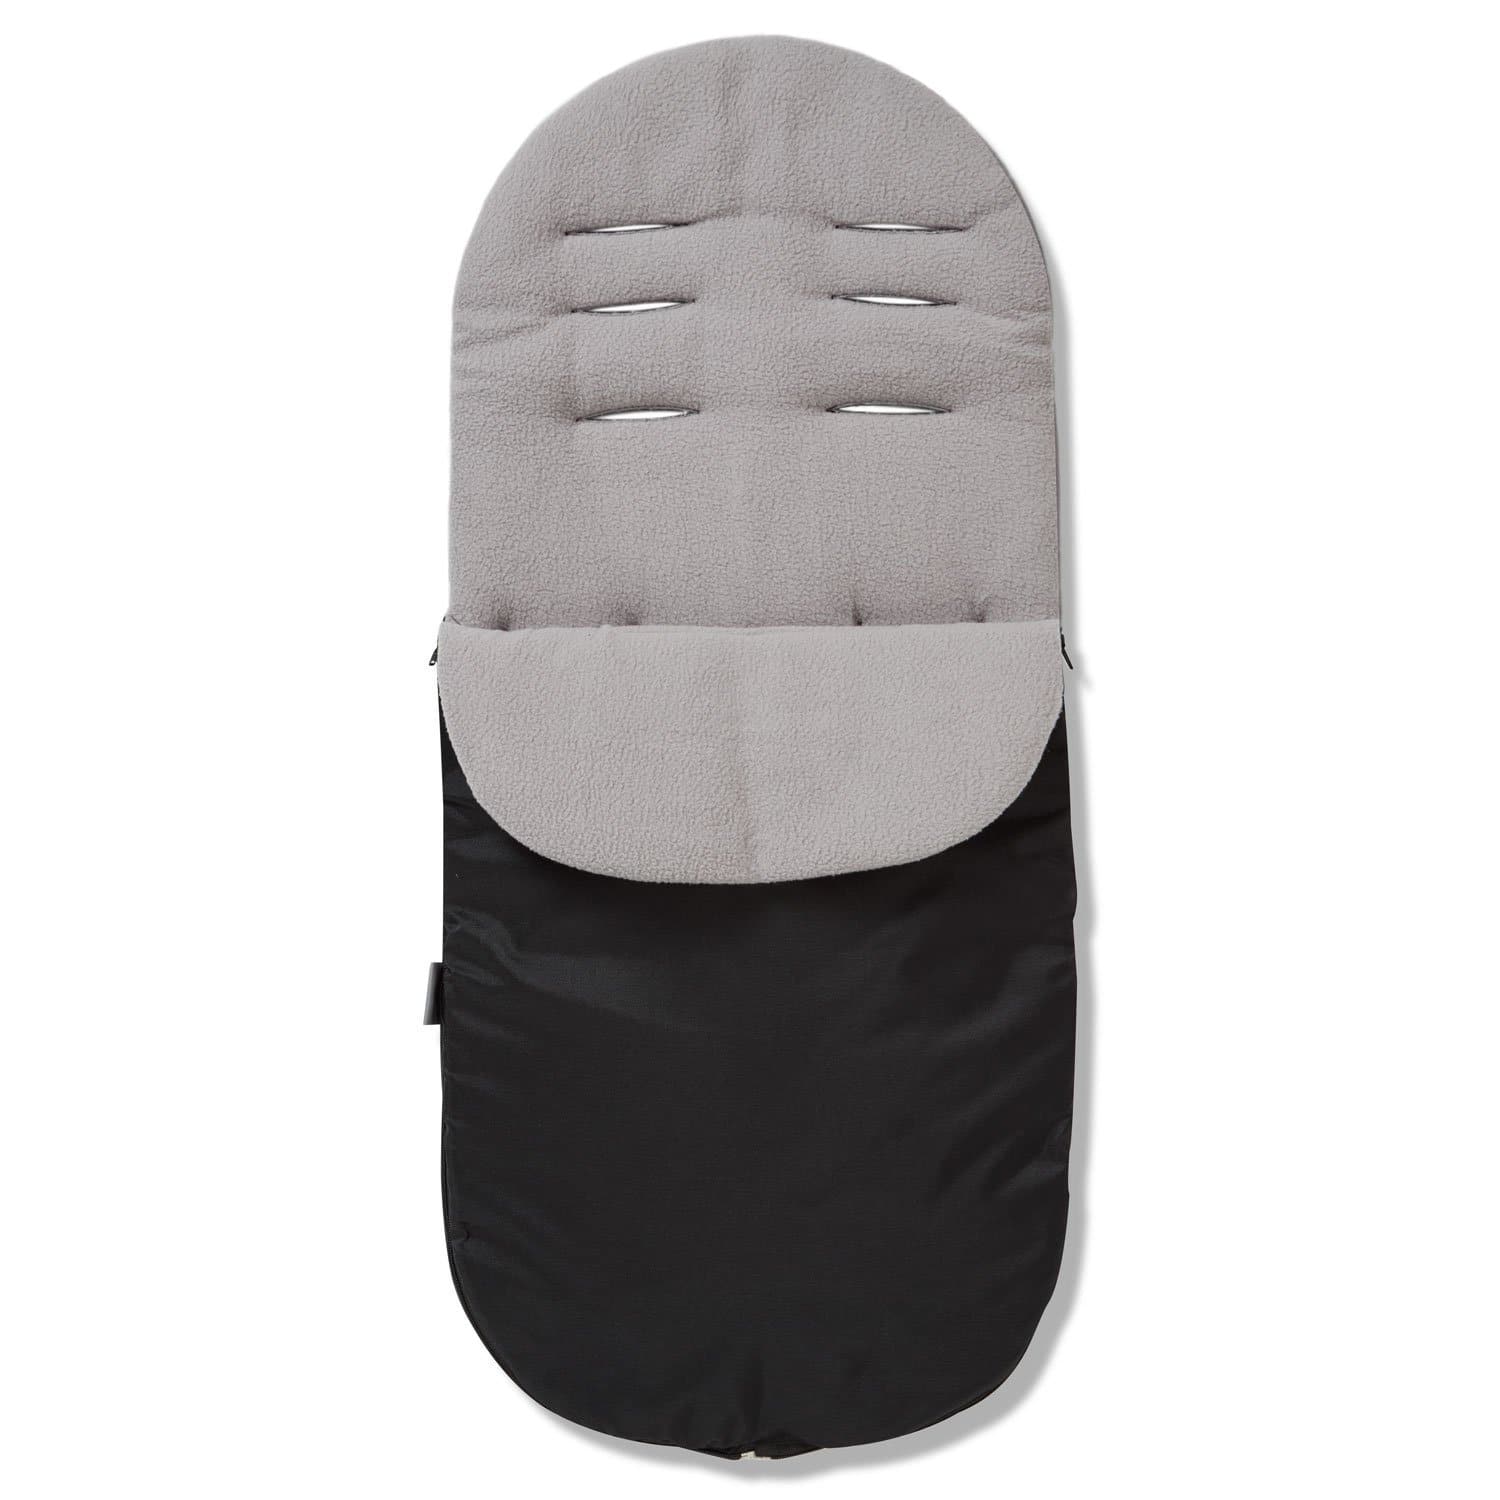 Footmuff / Cosy Toes Compatible with Uppababy - Grey / Fits All Models | For Your Little One